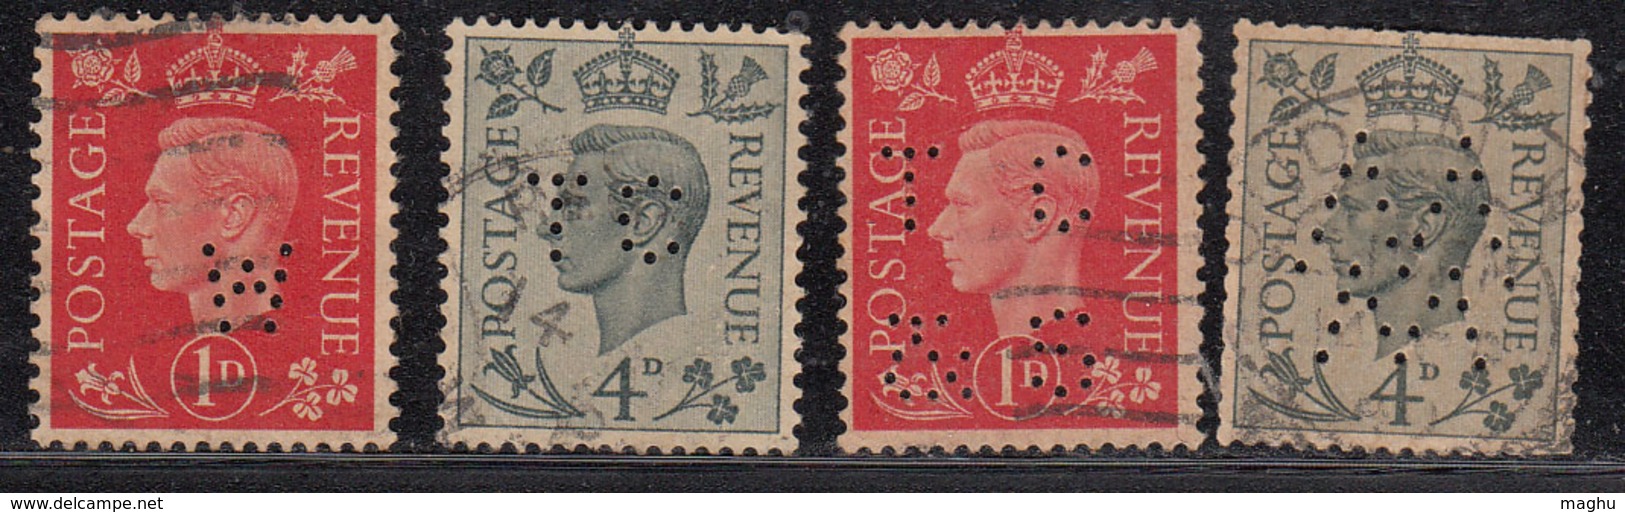 4 Diff Perfins / Perfin, KGVI Series, Great Britain Used, - Perfins